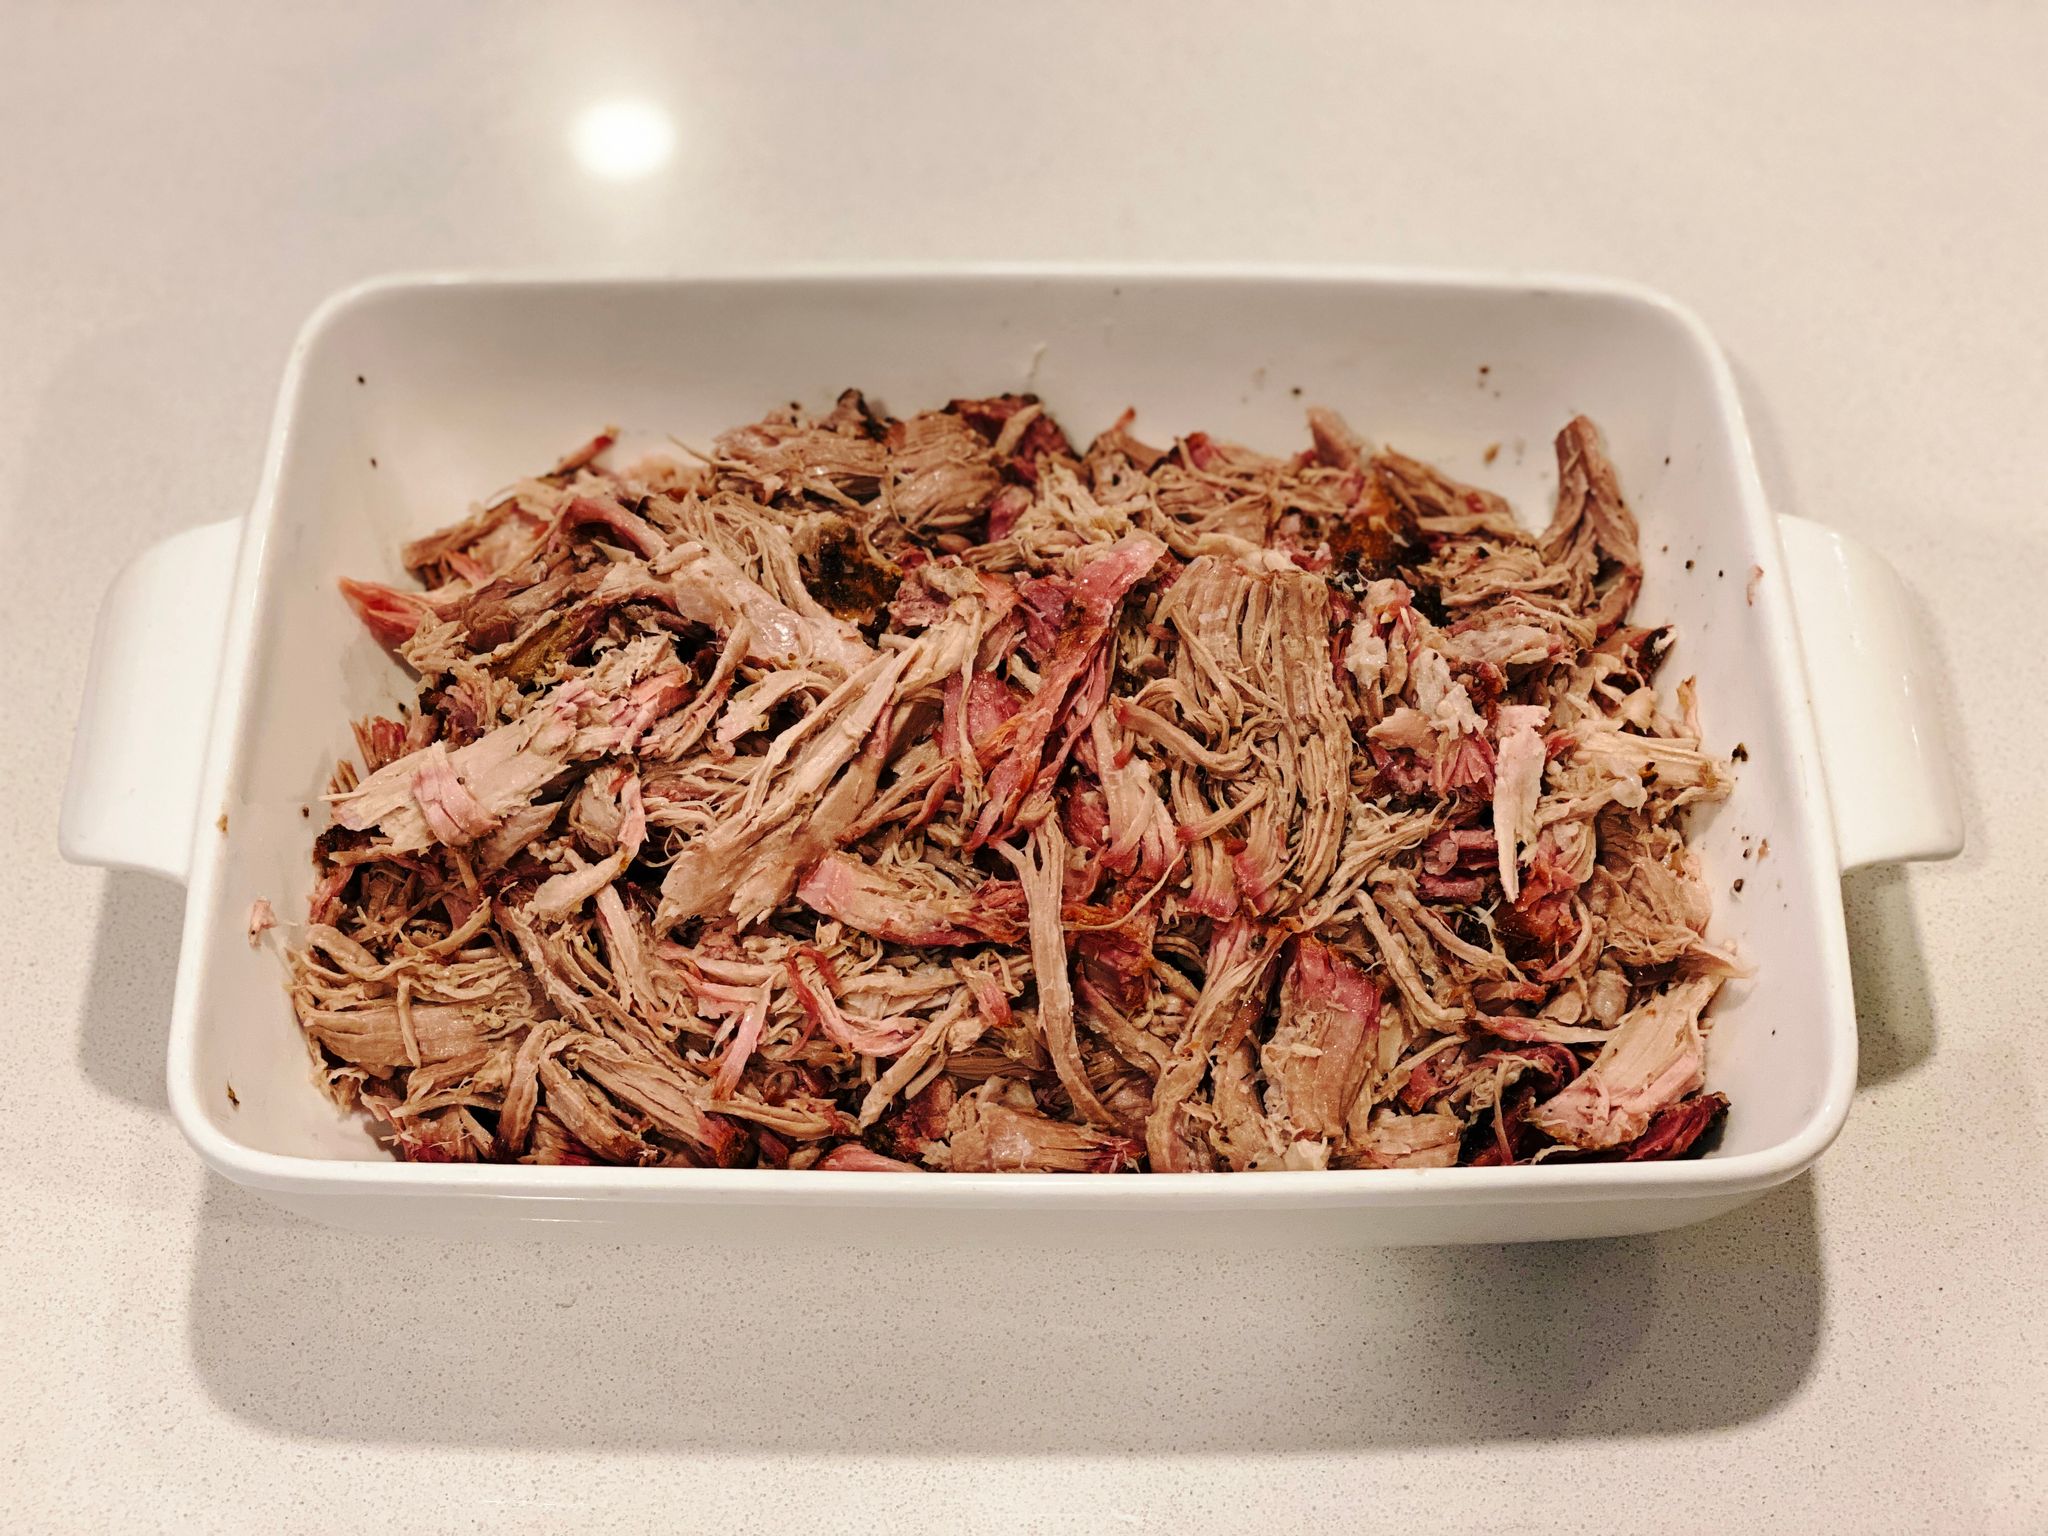 A photo of the now-pulled pork in the ceramic dish. It looks (and was) DELICIOUS.